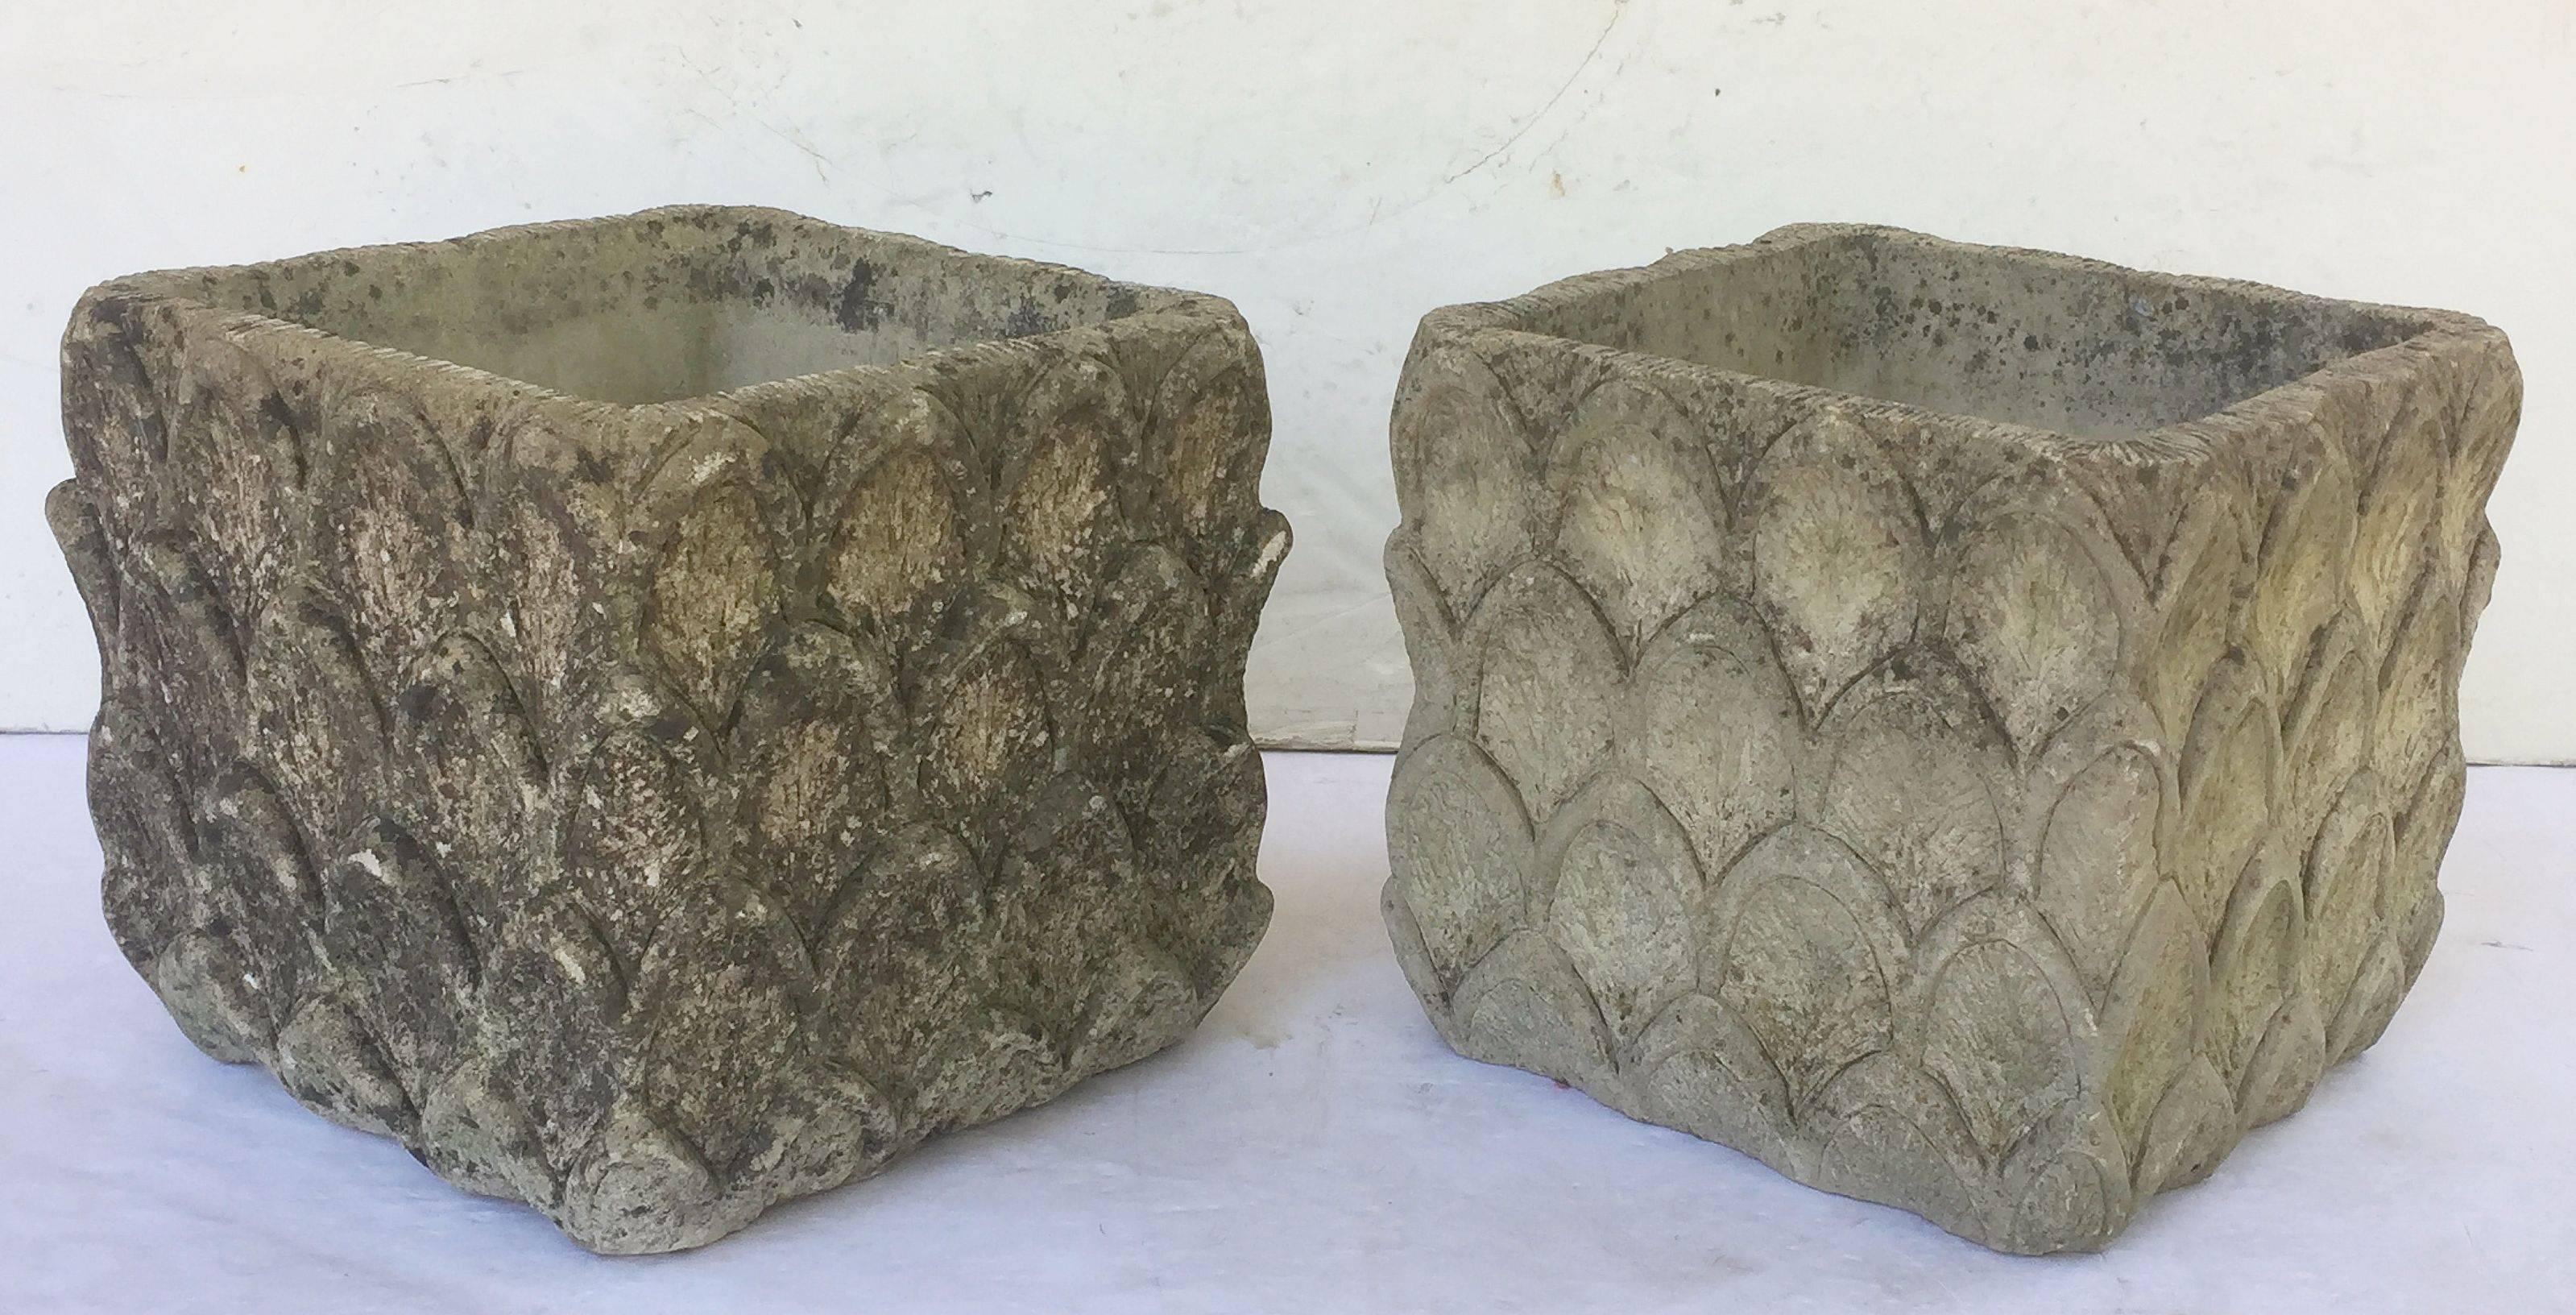 A pair of fine English garden planters or pots of composition stone from the Cotswolds, each square or box pot featuring a raised relief design around the circumference.

Perfect for a garden room or conservatory.

Two available - Priced